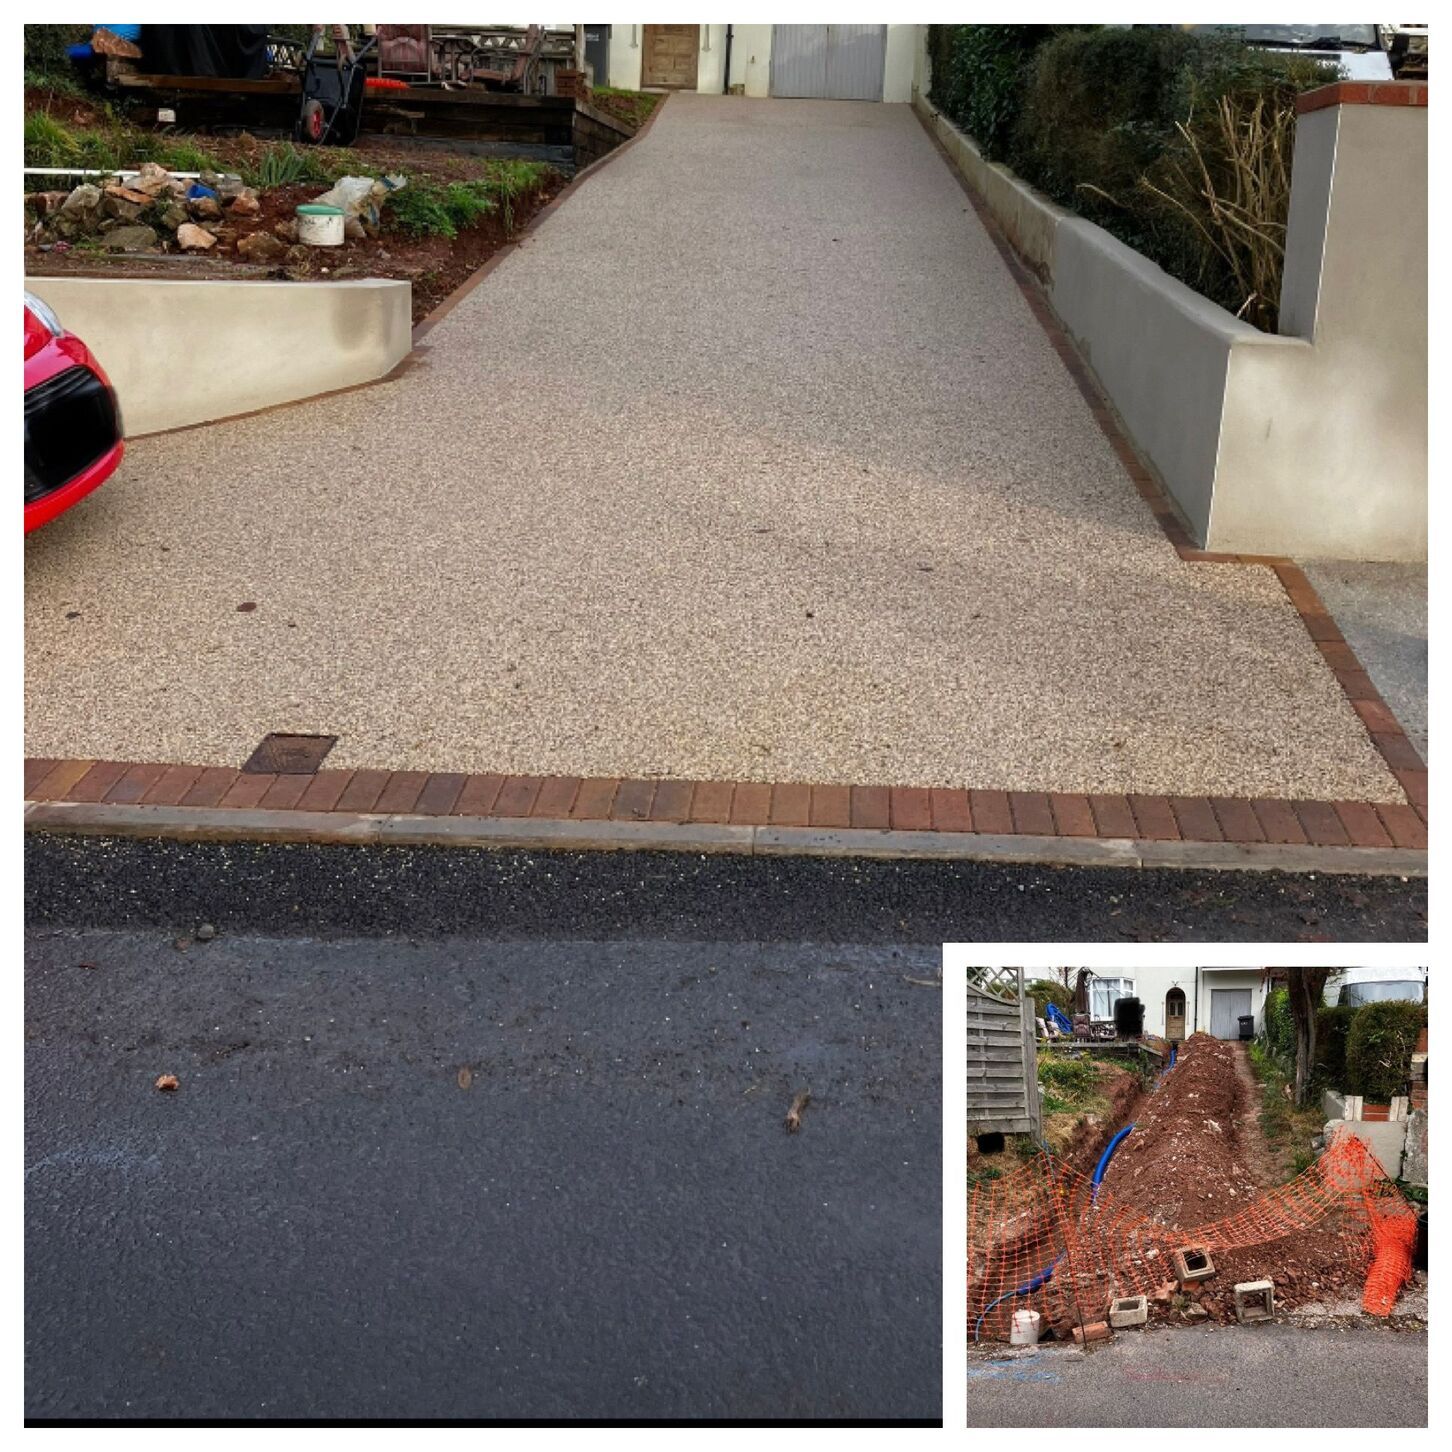 Transformation of a tired driveway into a resin driveway.